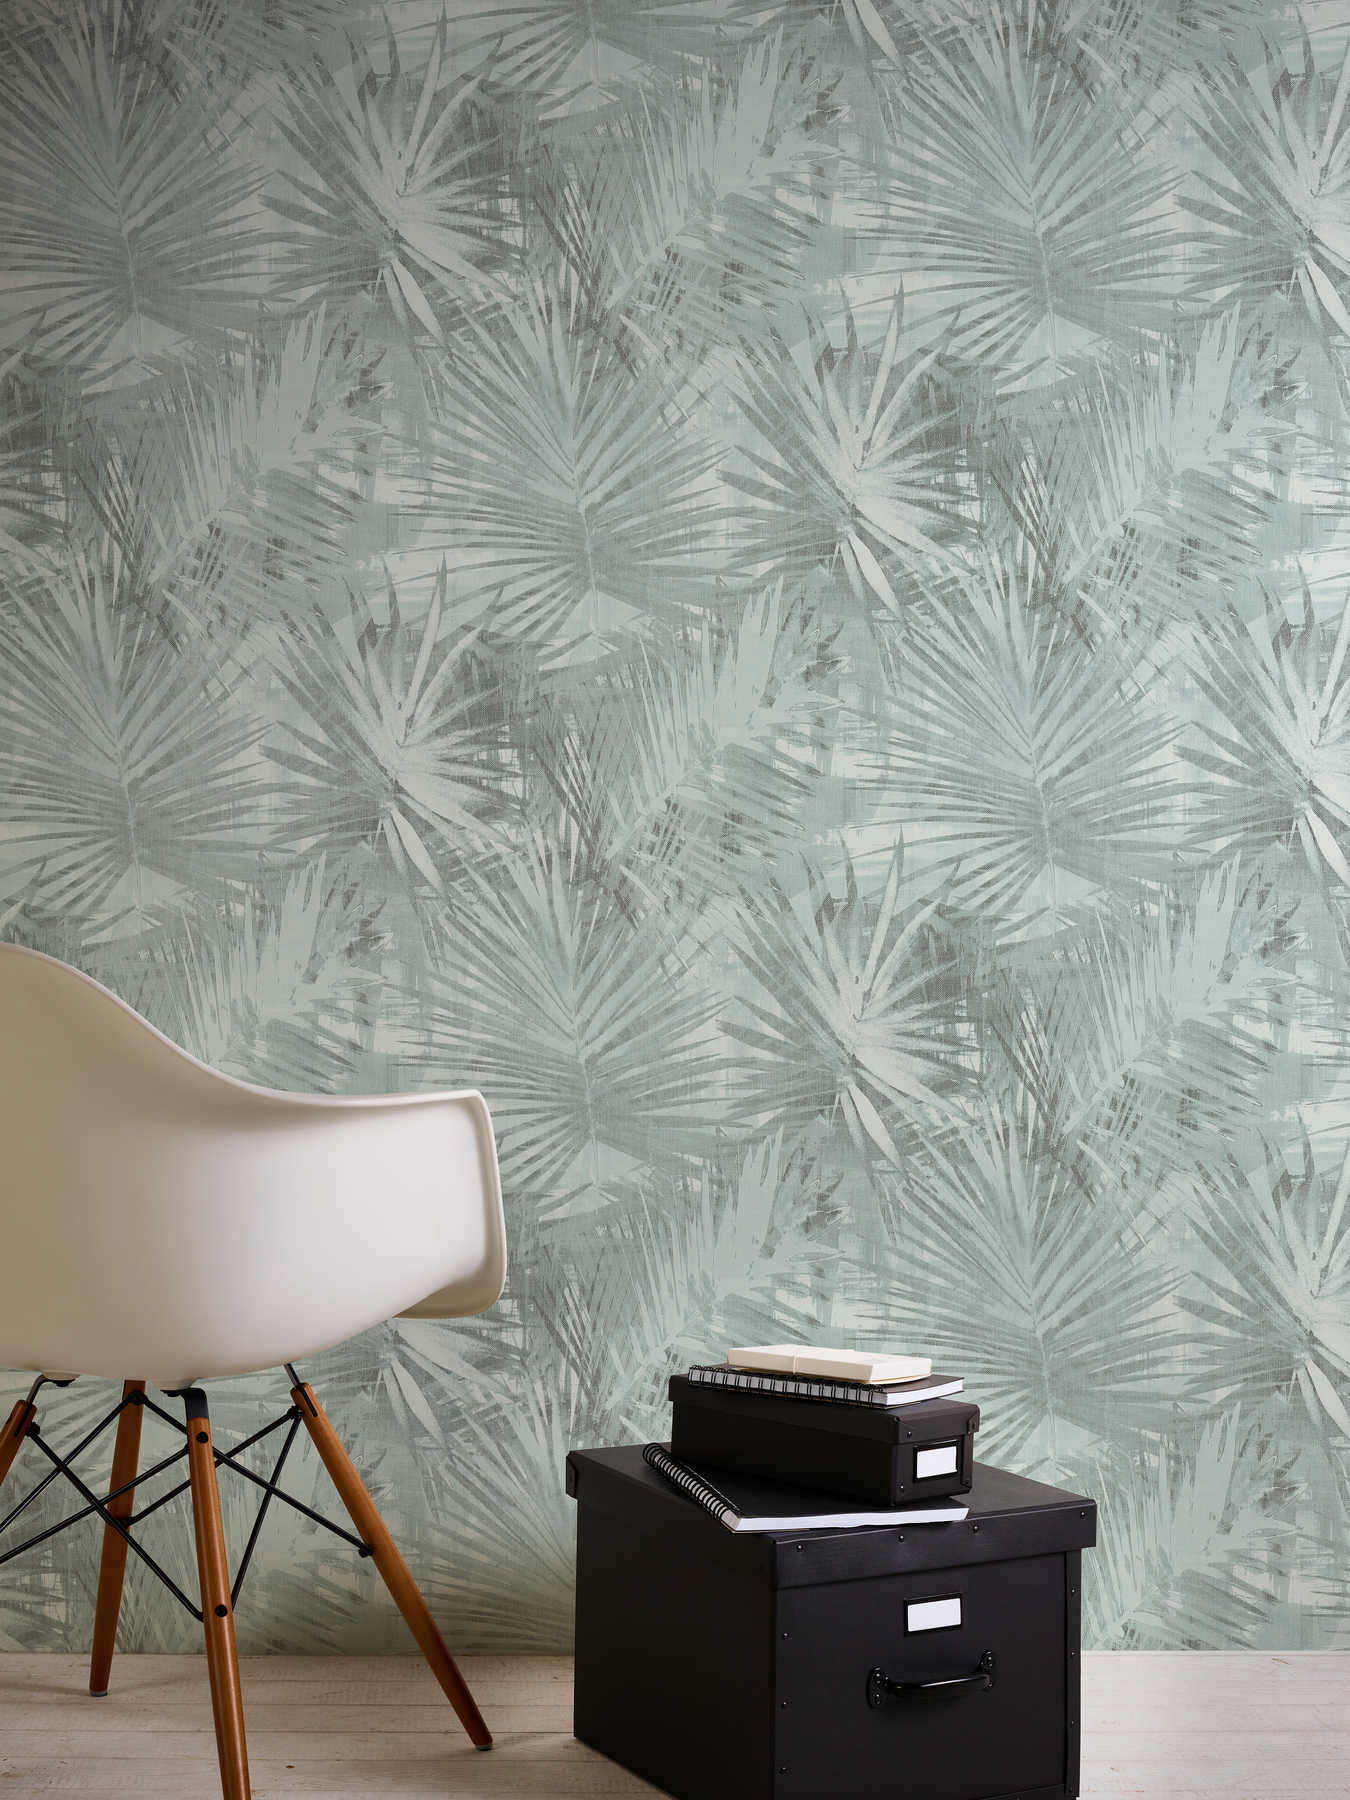             Leaves non-woven wallpaper with abstract fern pattern - green
        